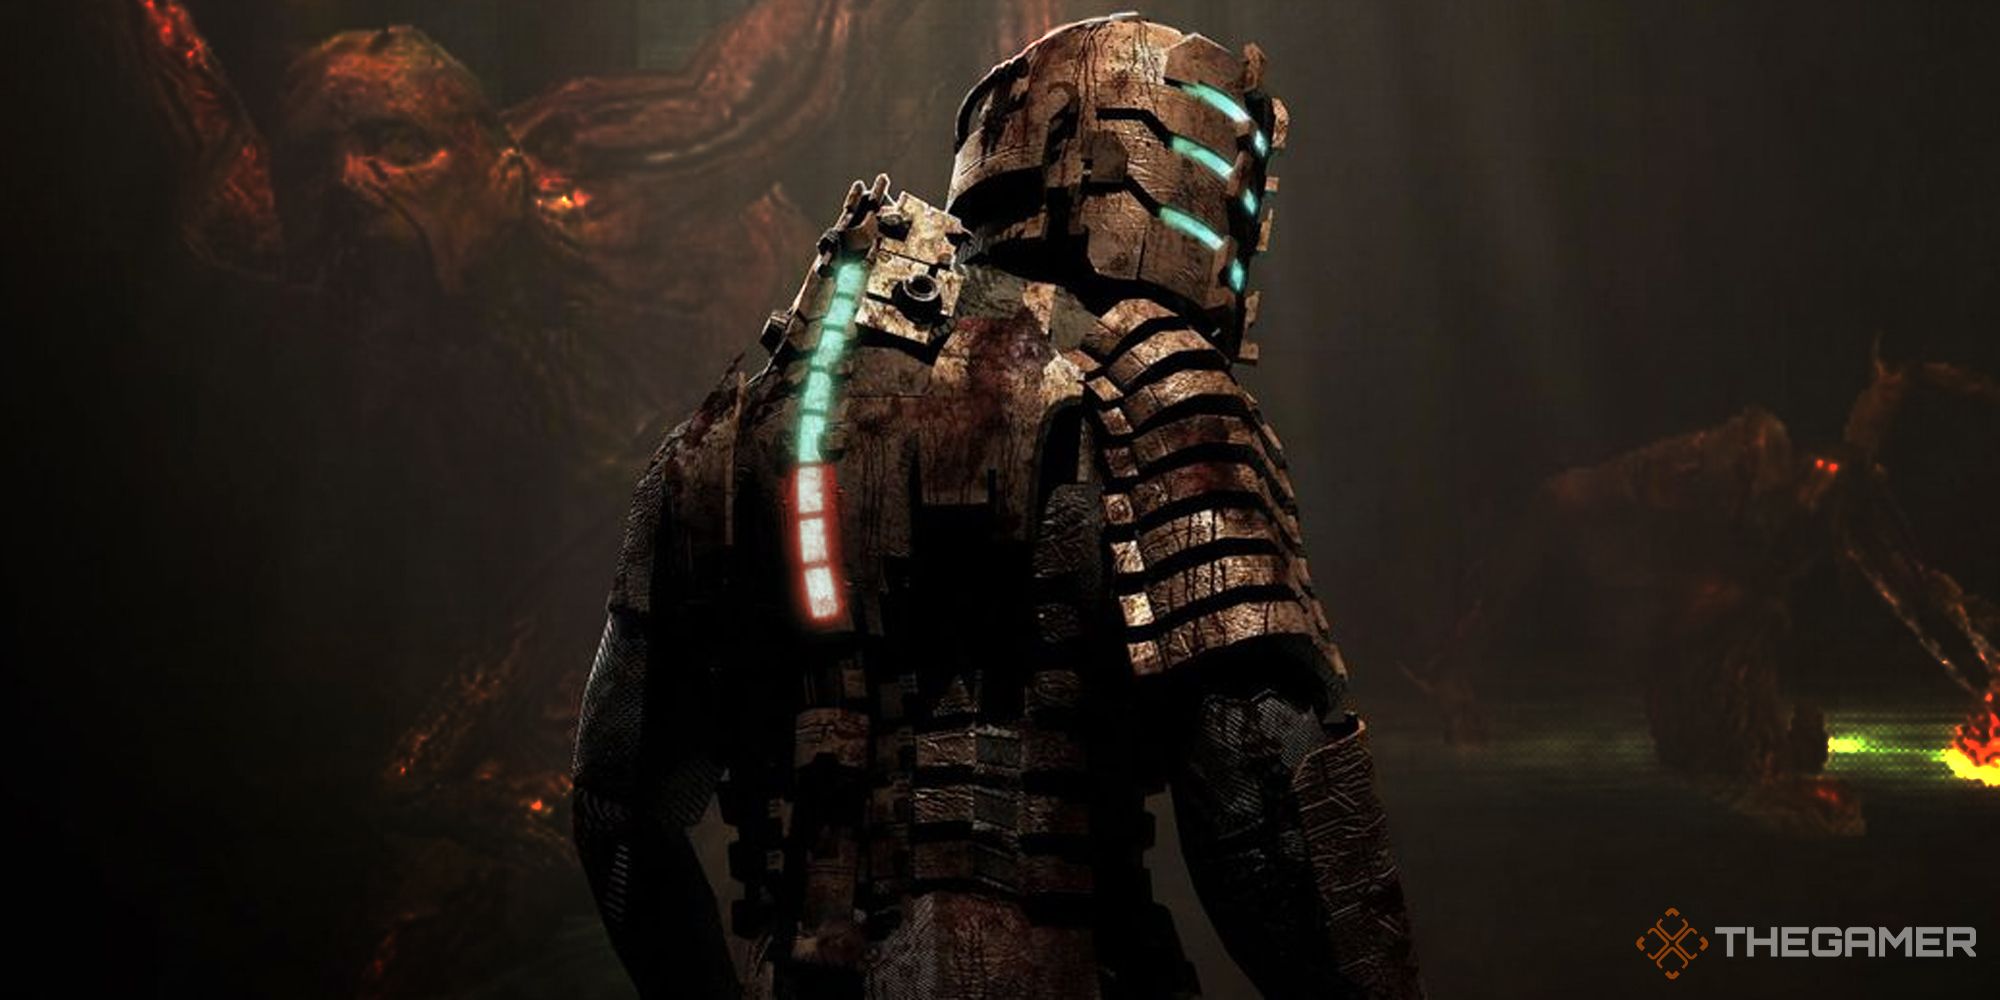 dead space - isaac in the centre of the frame with contorted faces and monsters in the darkness around him